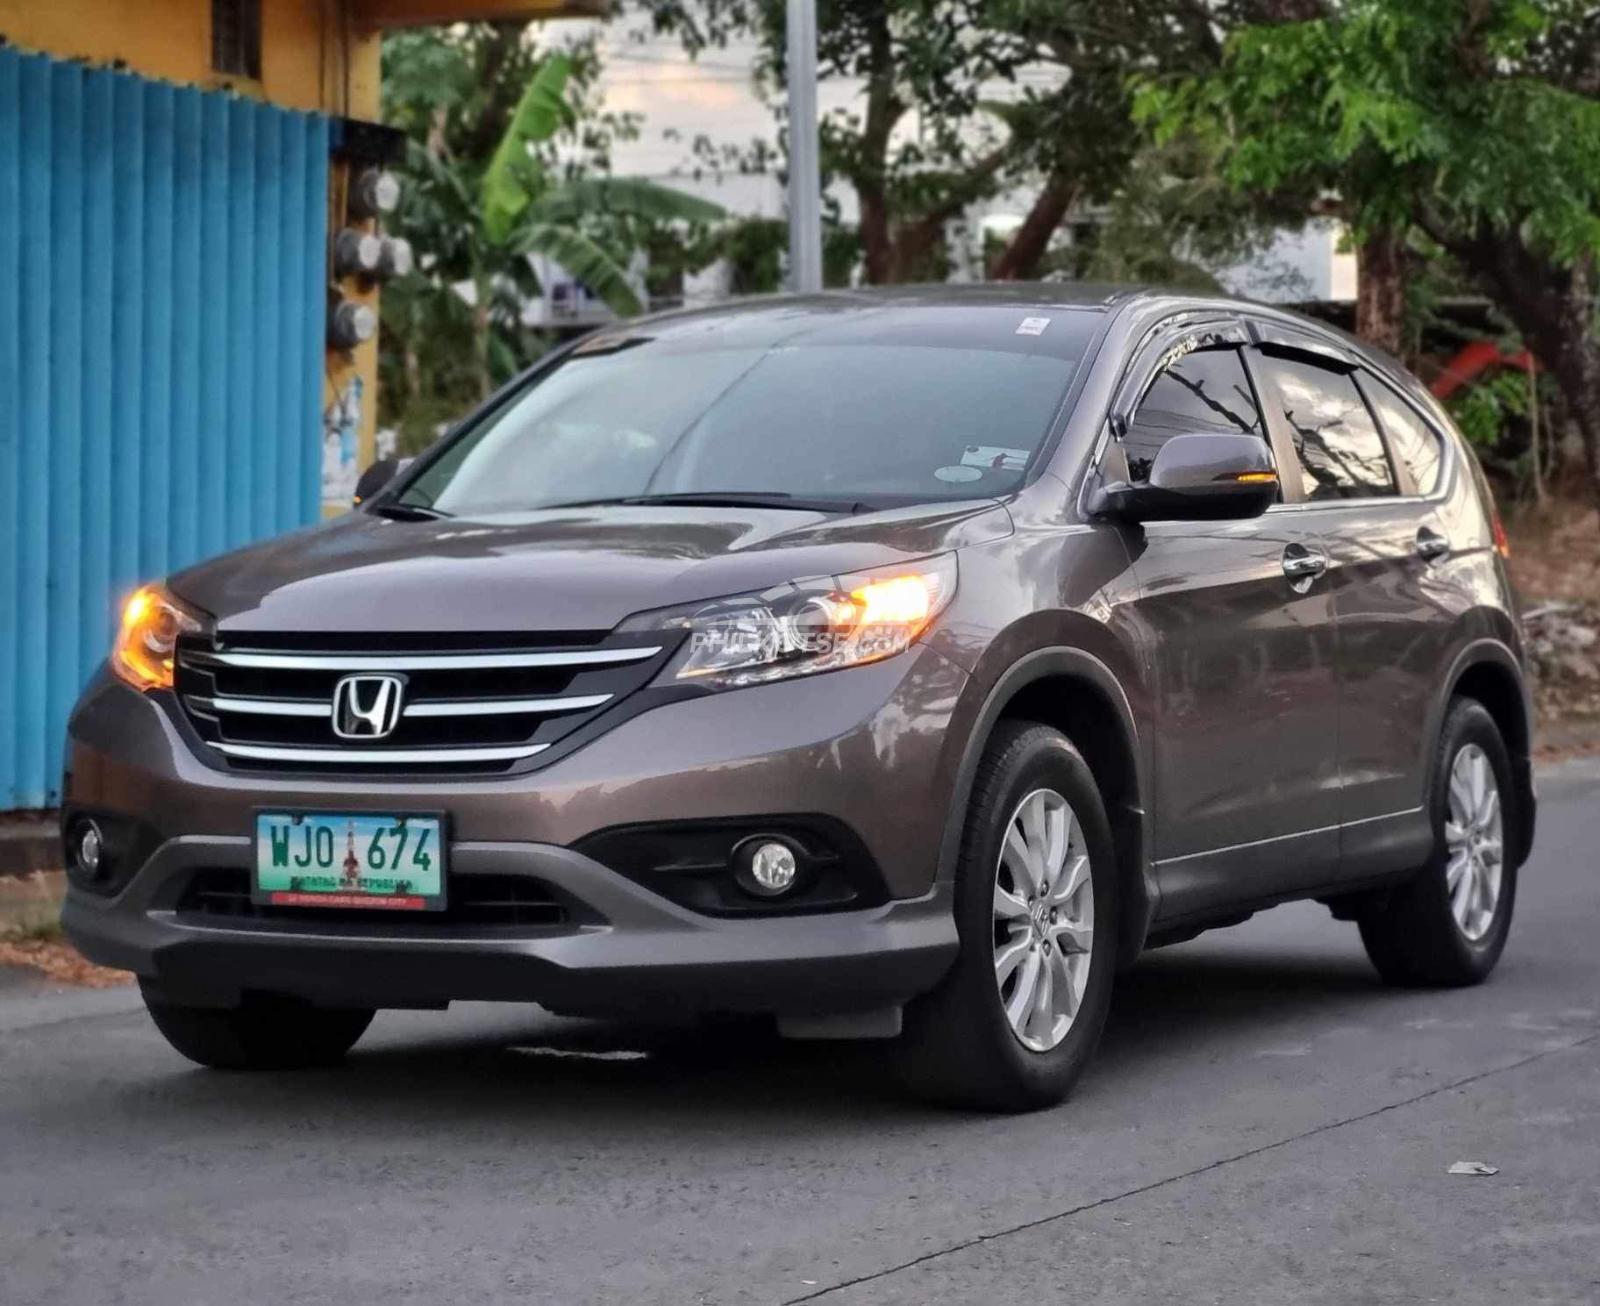 HOT!!! 2013 Honda CRV for sale at affordable price